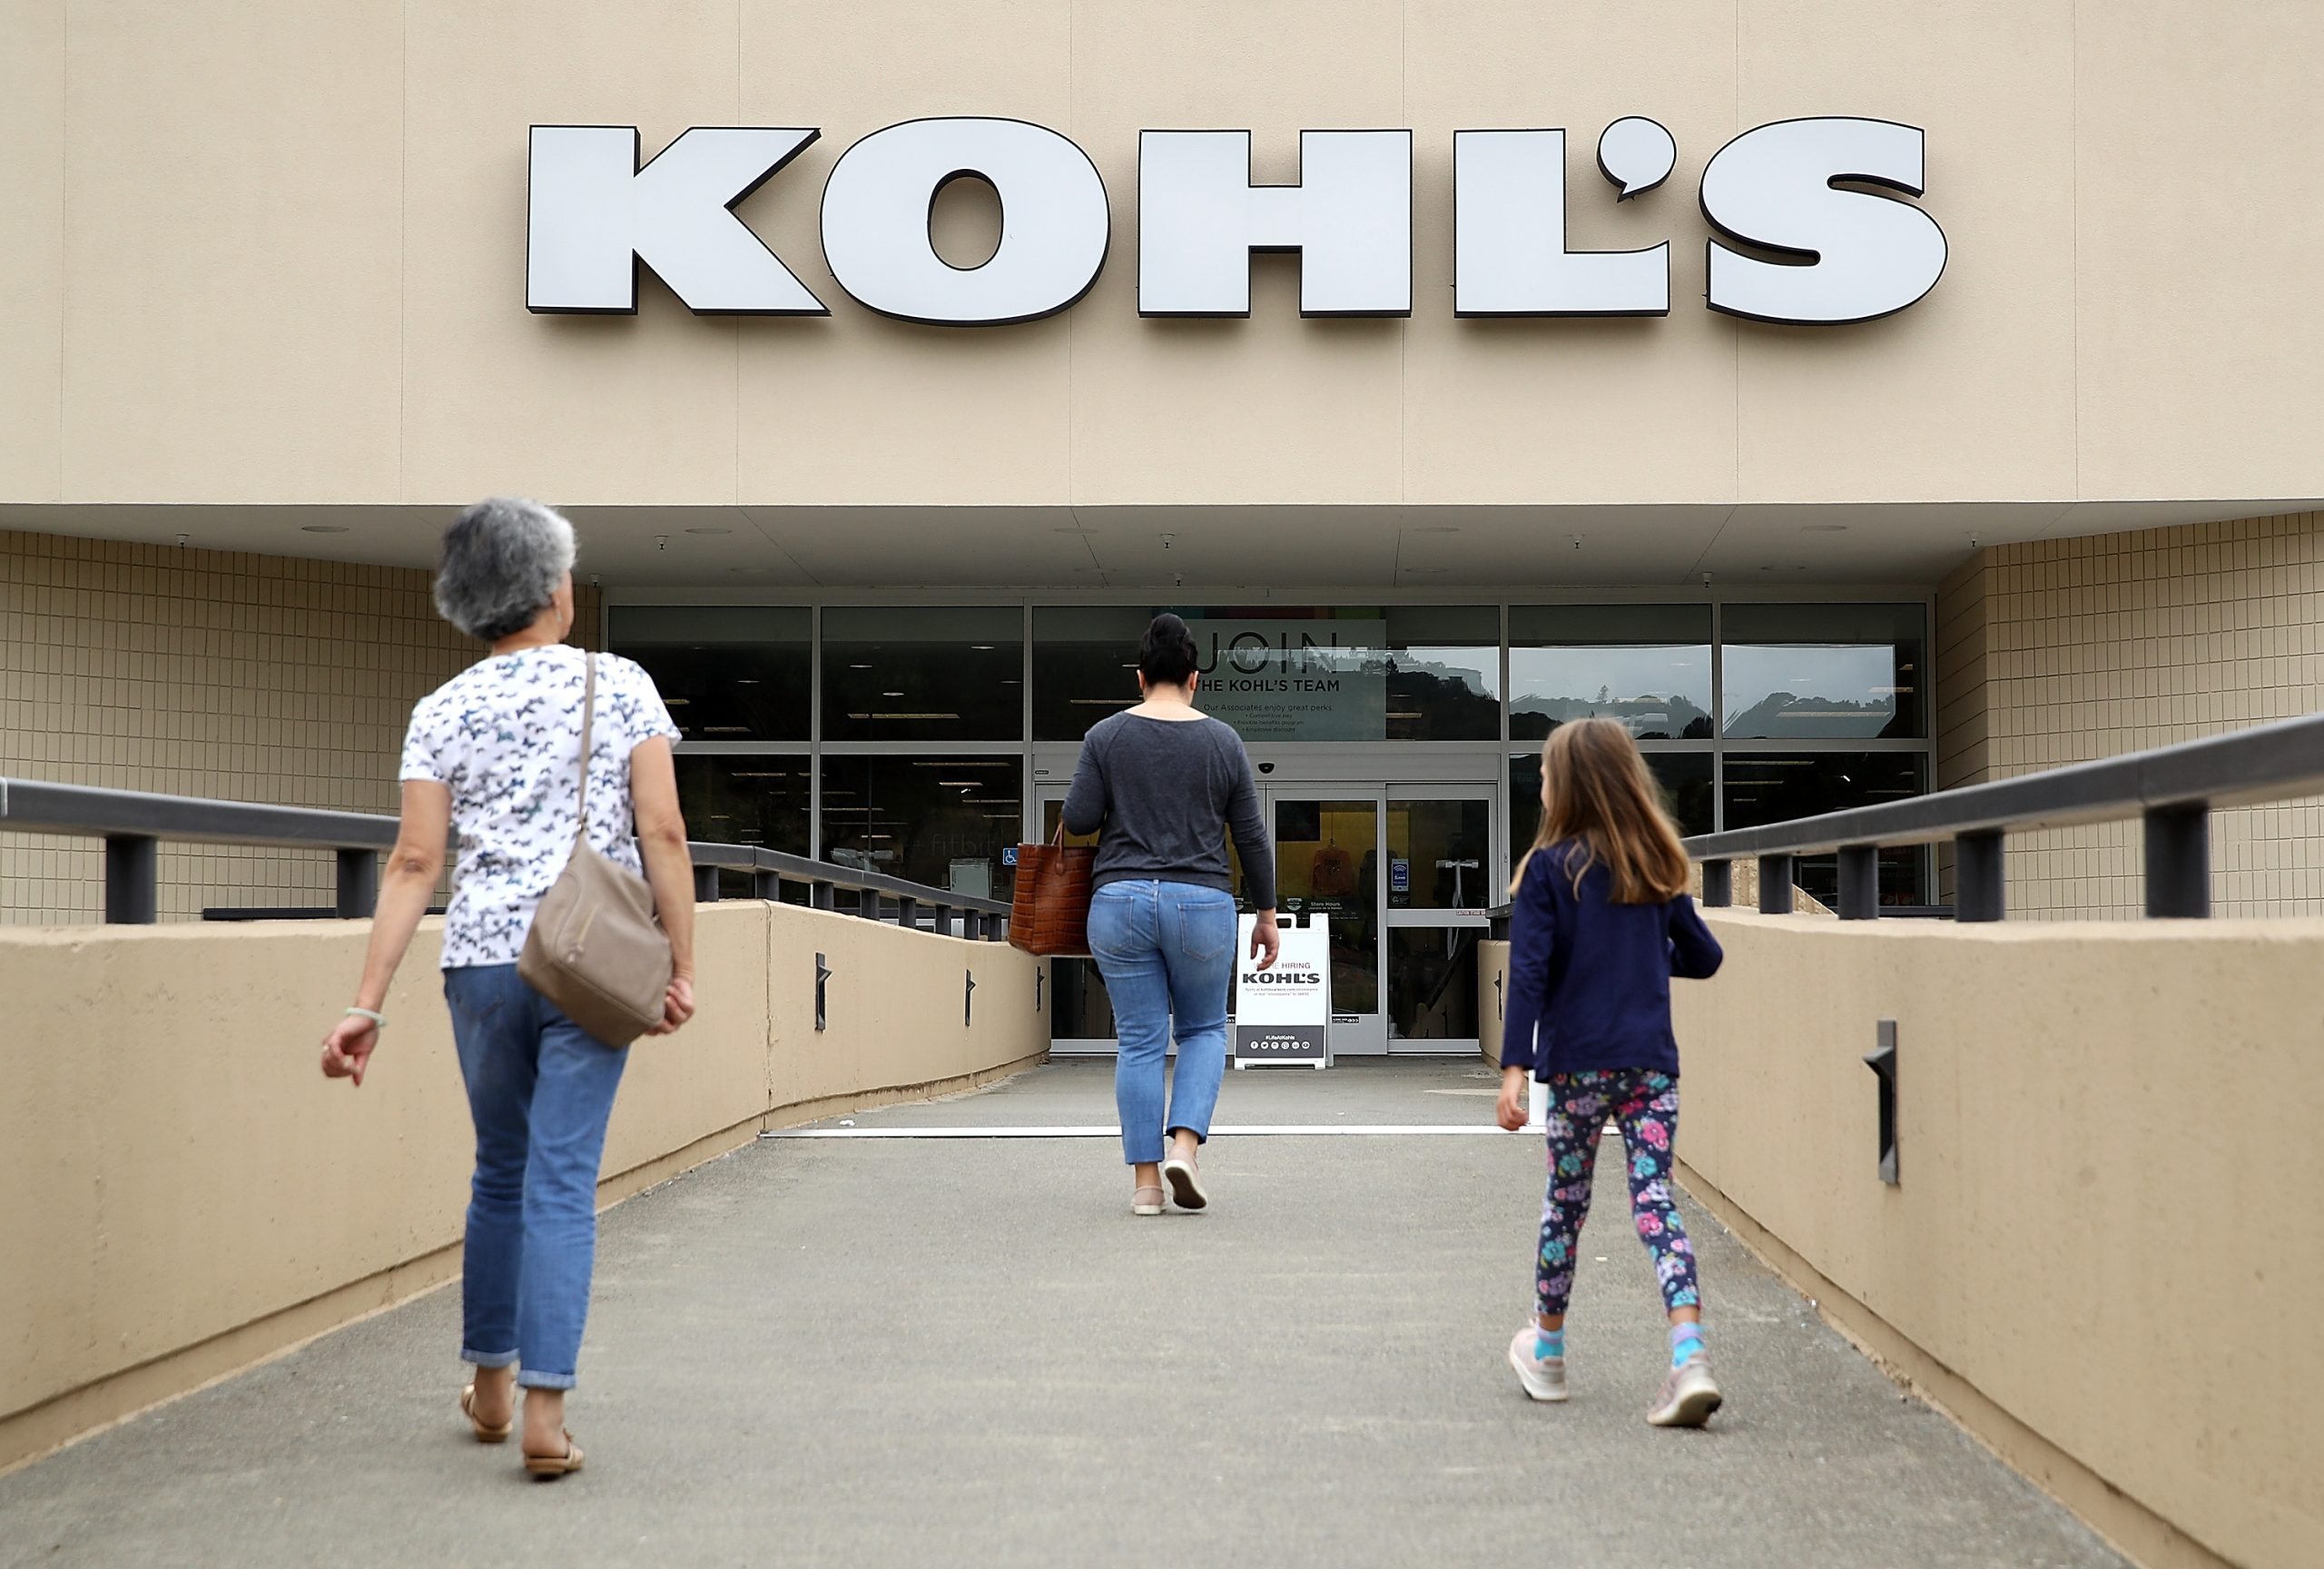 Kohl’s Black Friday Ad Just Came Out and It's Loaded With Doorbusters and Deals